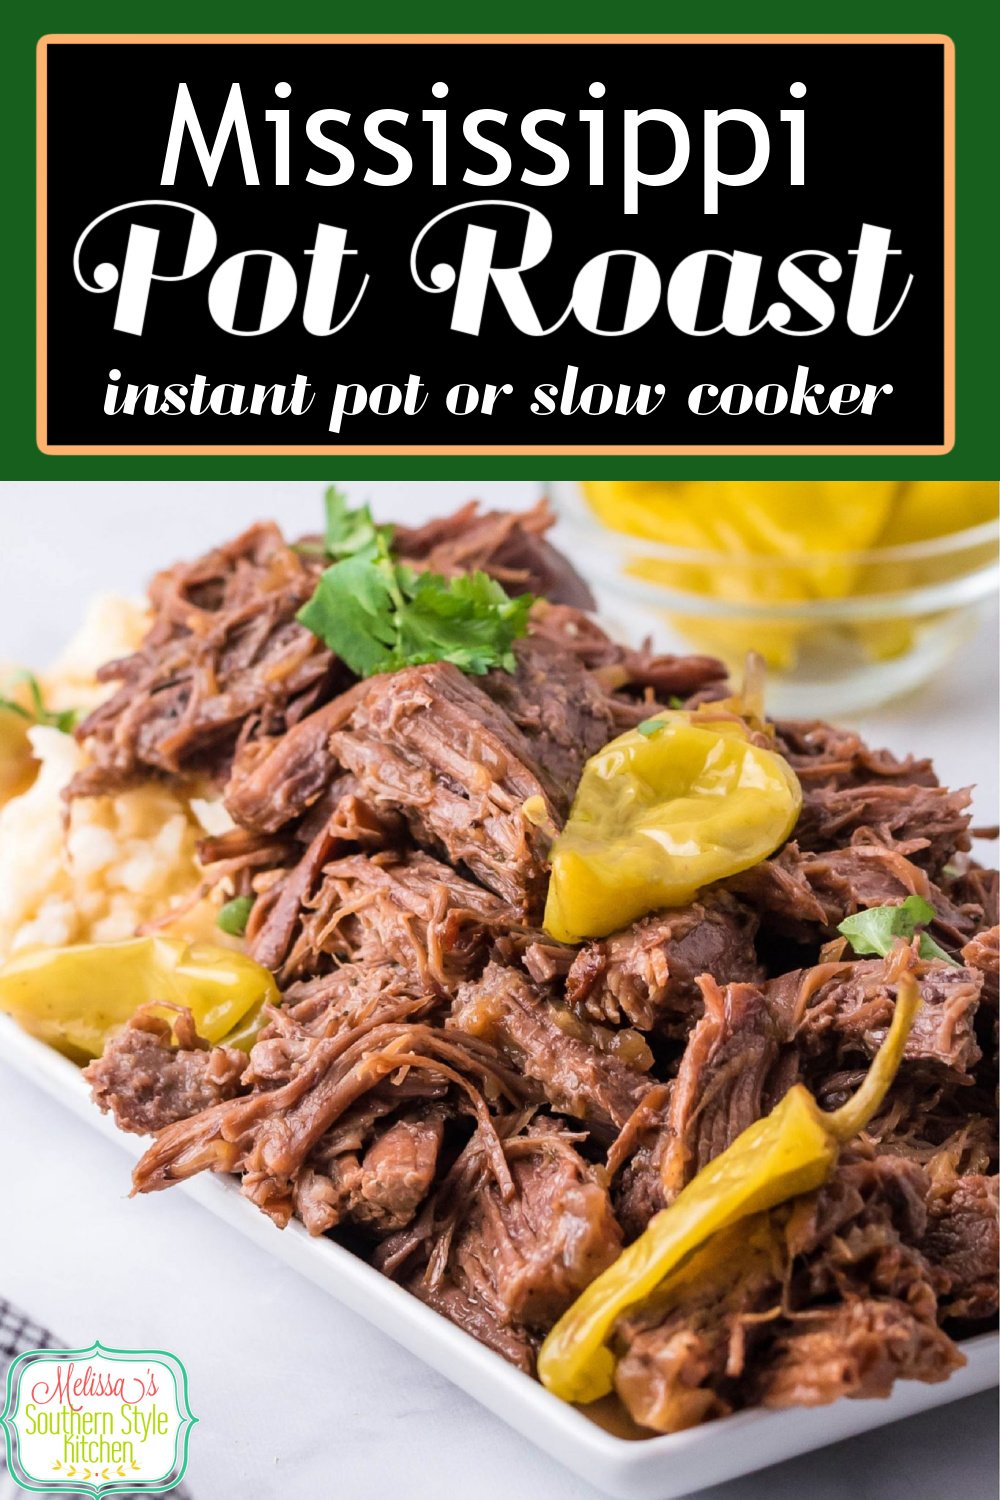 Make this melt in your mouth Instant Pot Mississippi Pot Roast in no time flat (Oven and Slow Cooker instructions included!) #instantpot #roast #sundaysupperrecipes #beef #southernrecipes #mississippipotroast #potroastrecipes #southernrecipes #easyrecipes via @melissasssk